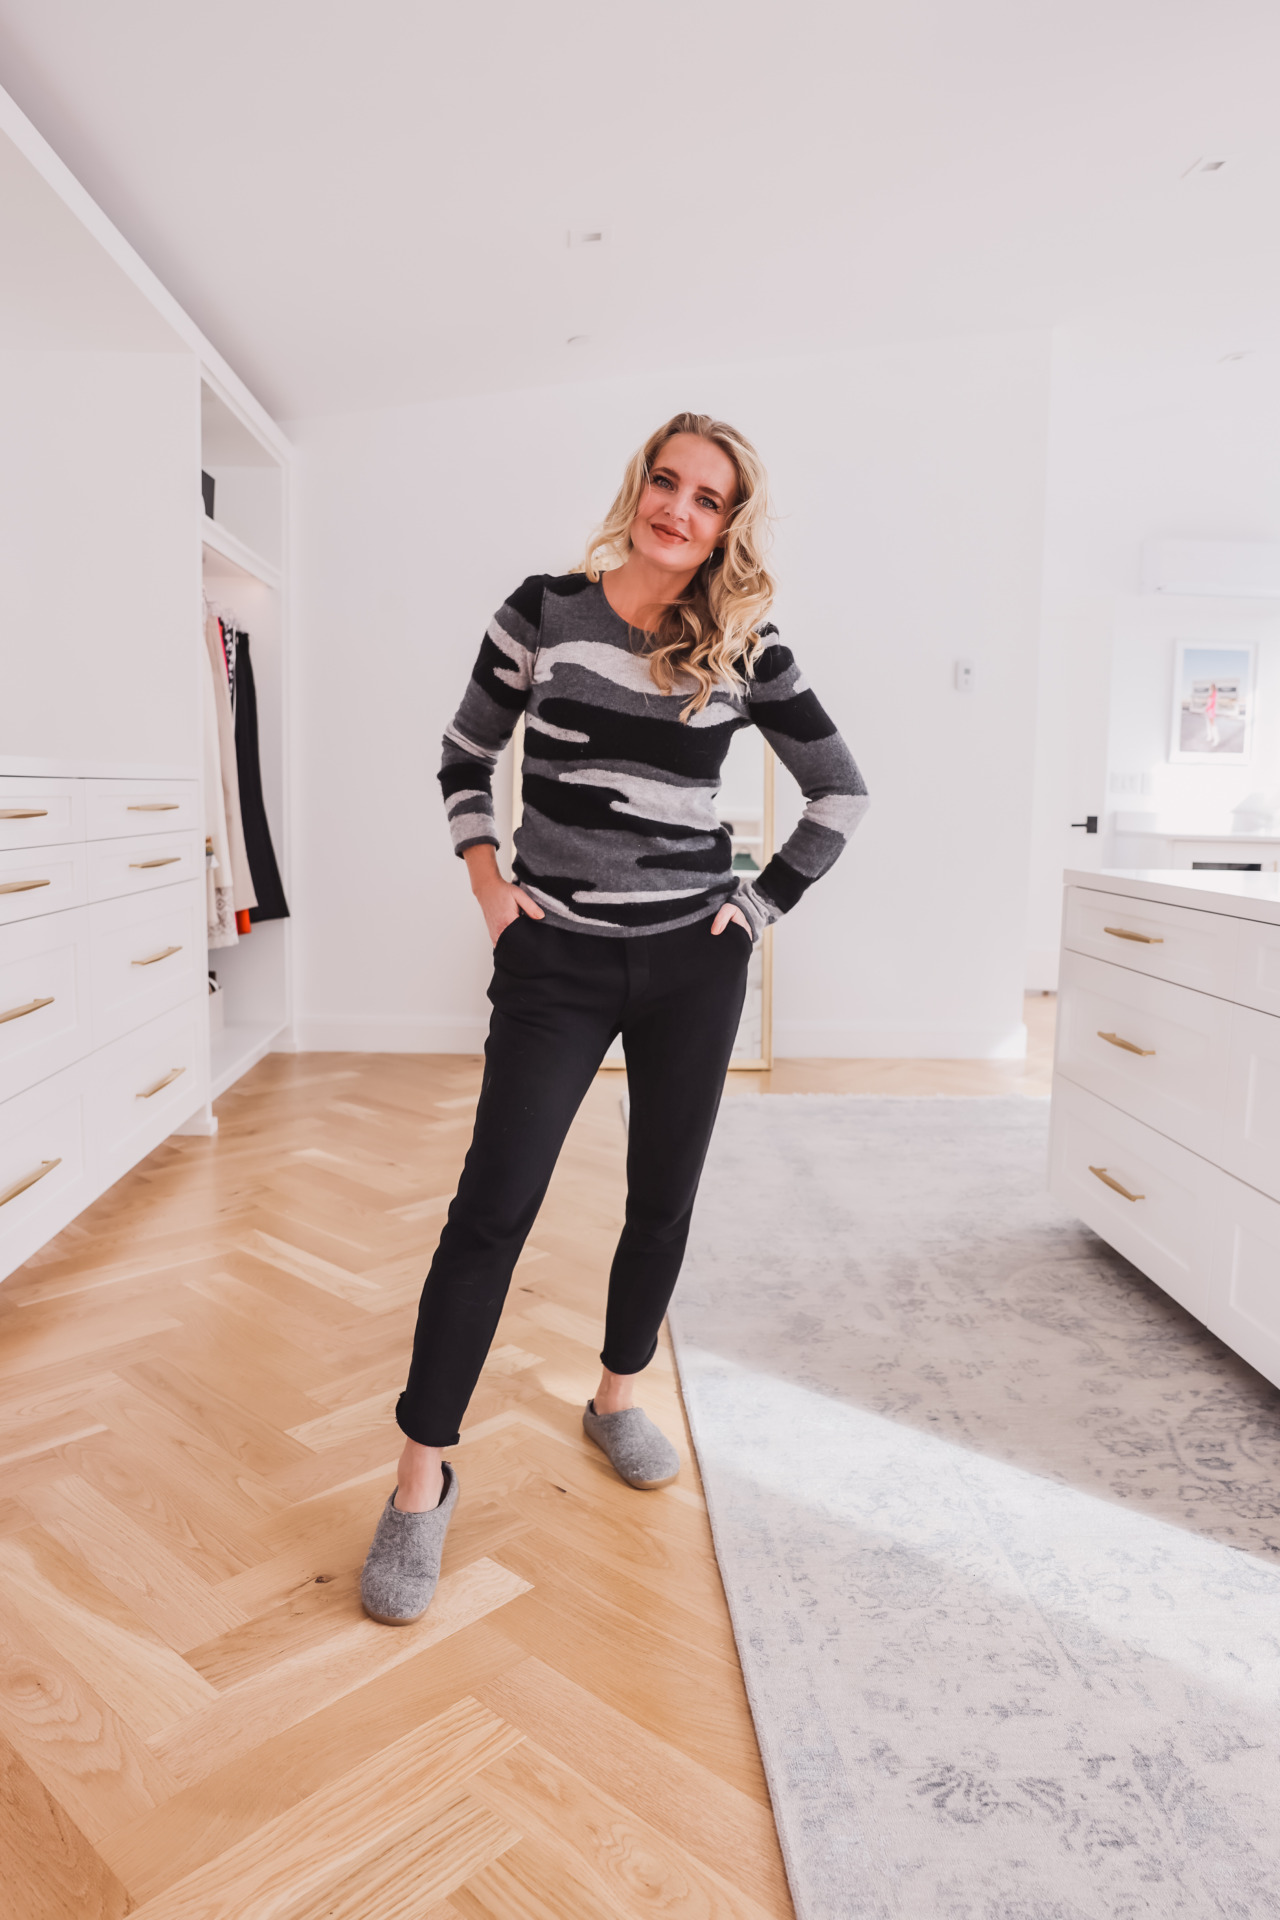 comfortable outfits for home, comfortable outfits to wear at home, what to wear at home, how to dress cute at home, stylish work from home outfits, comfy work from home clothes, erin busbee, busbee style, fashion over 40, camo sweater, frank & eileen weatpants, gray slippers